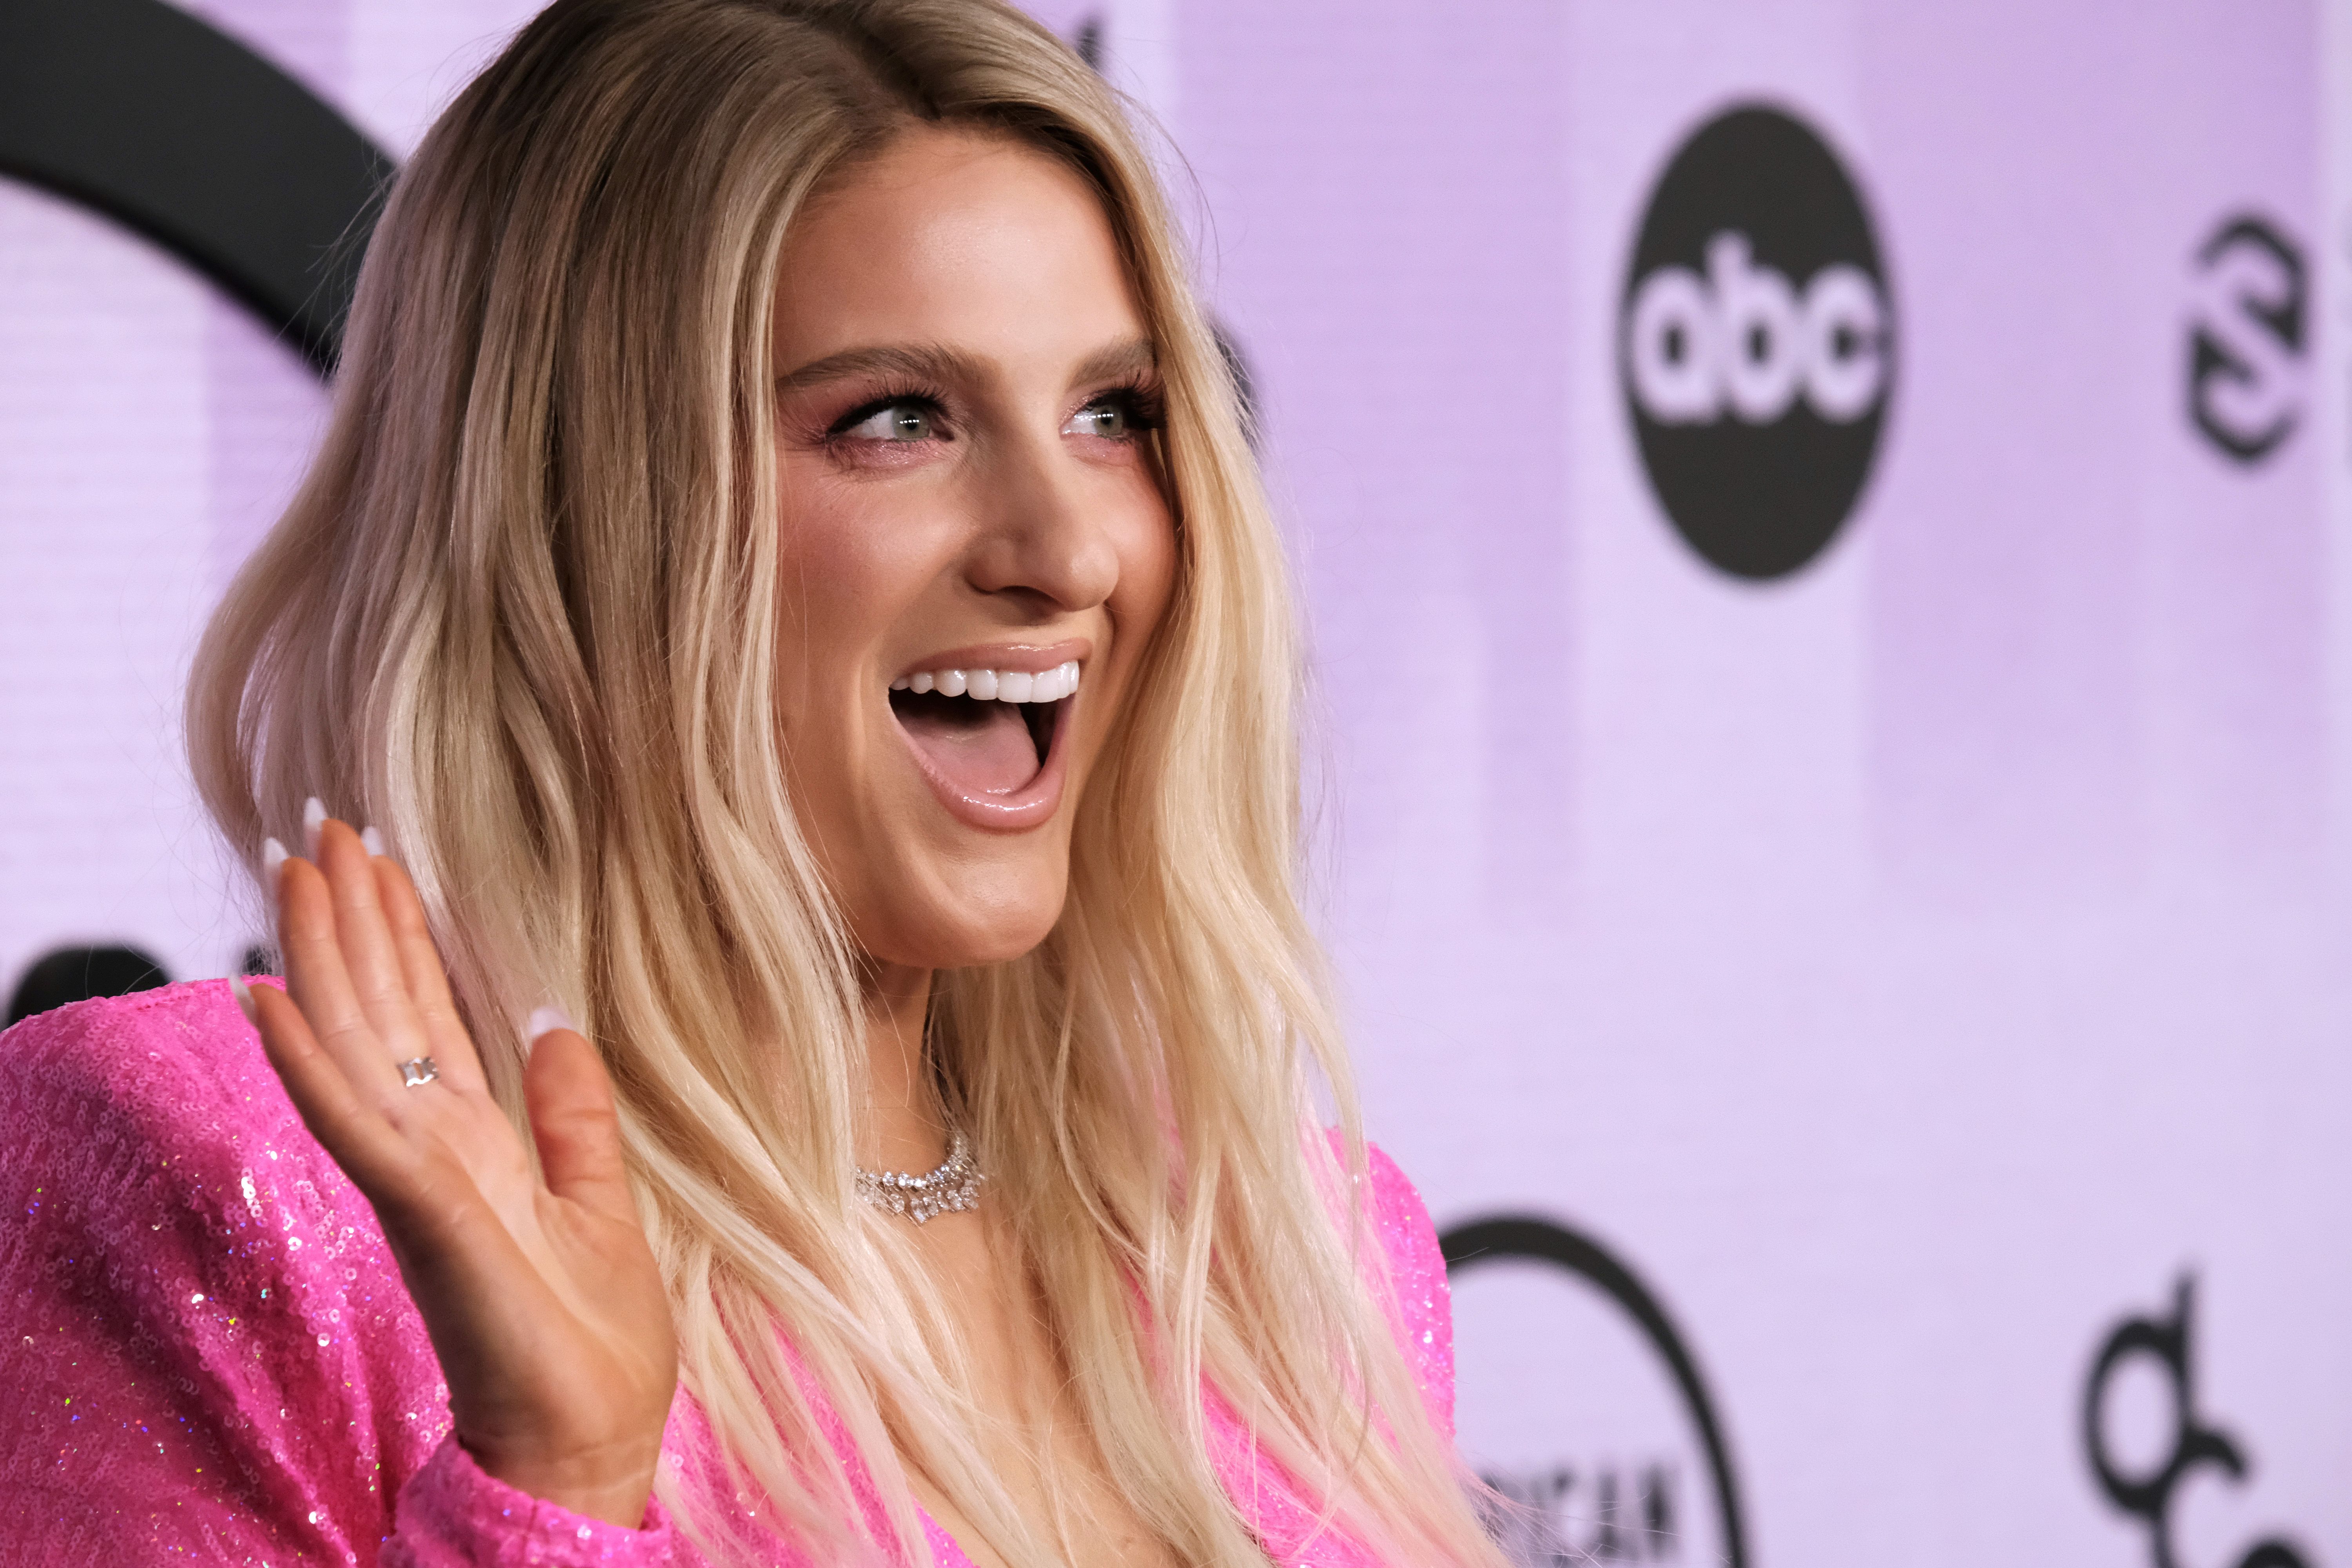 Meghan Trainor reveals why she refuses to wear skimpy outfits on